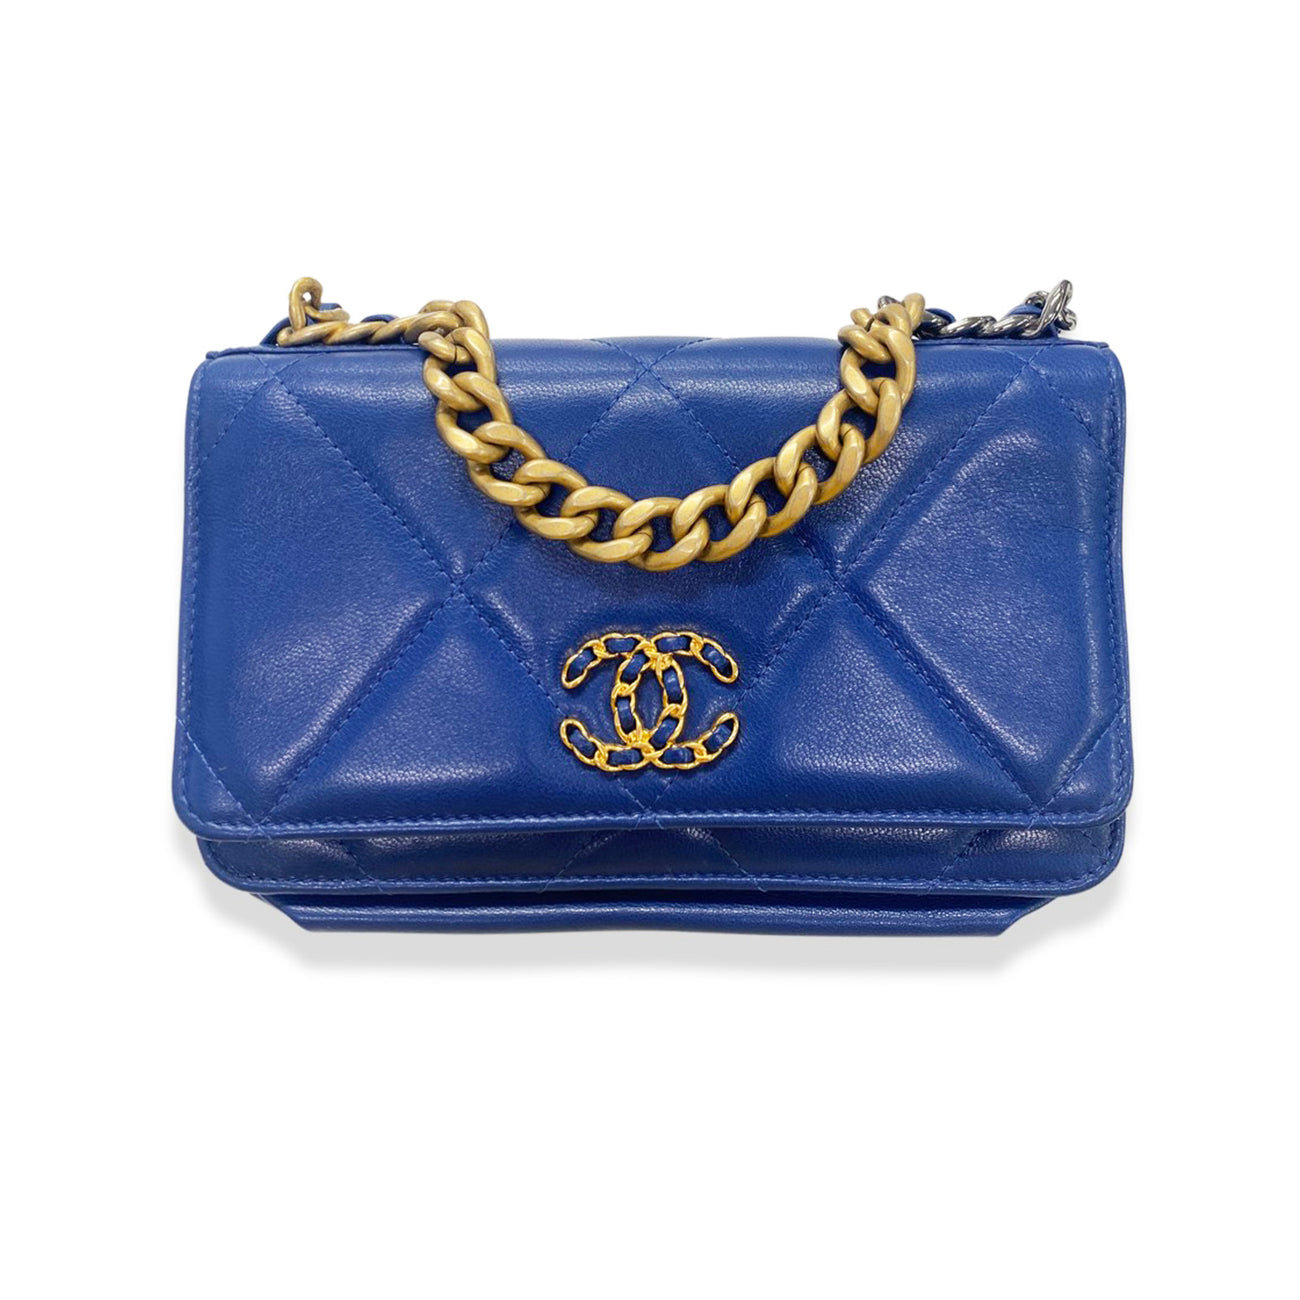 Chanel Blue And Gold Leather WOC Handbag